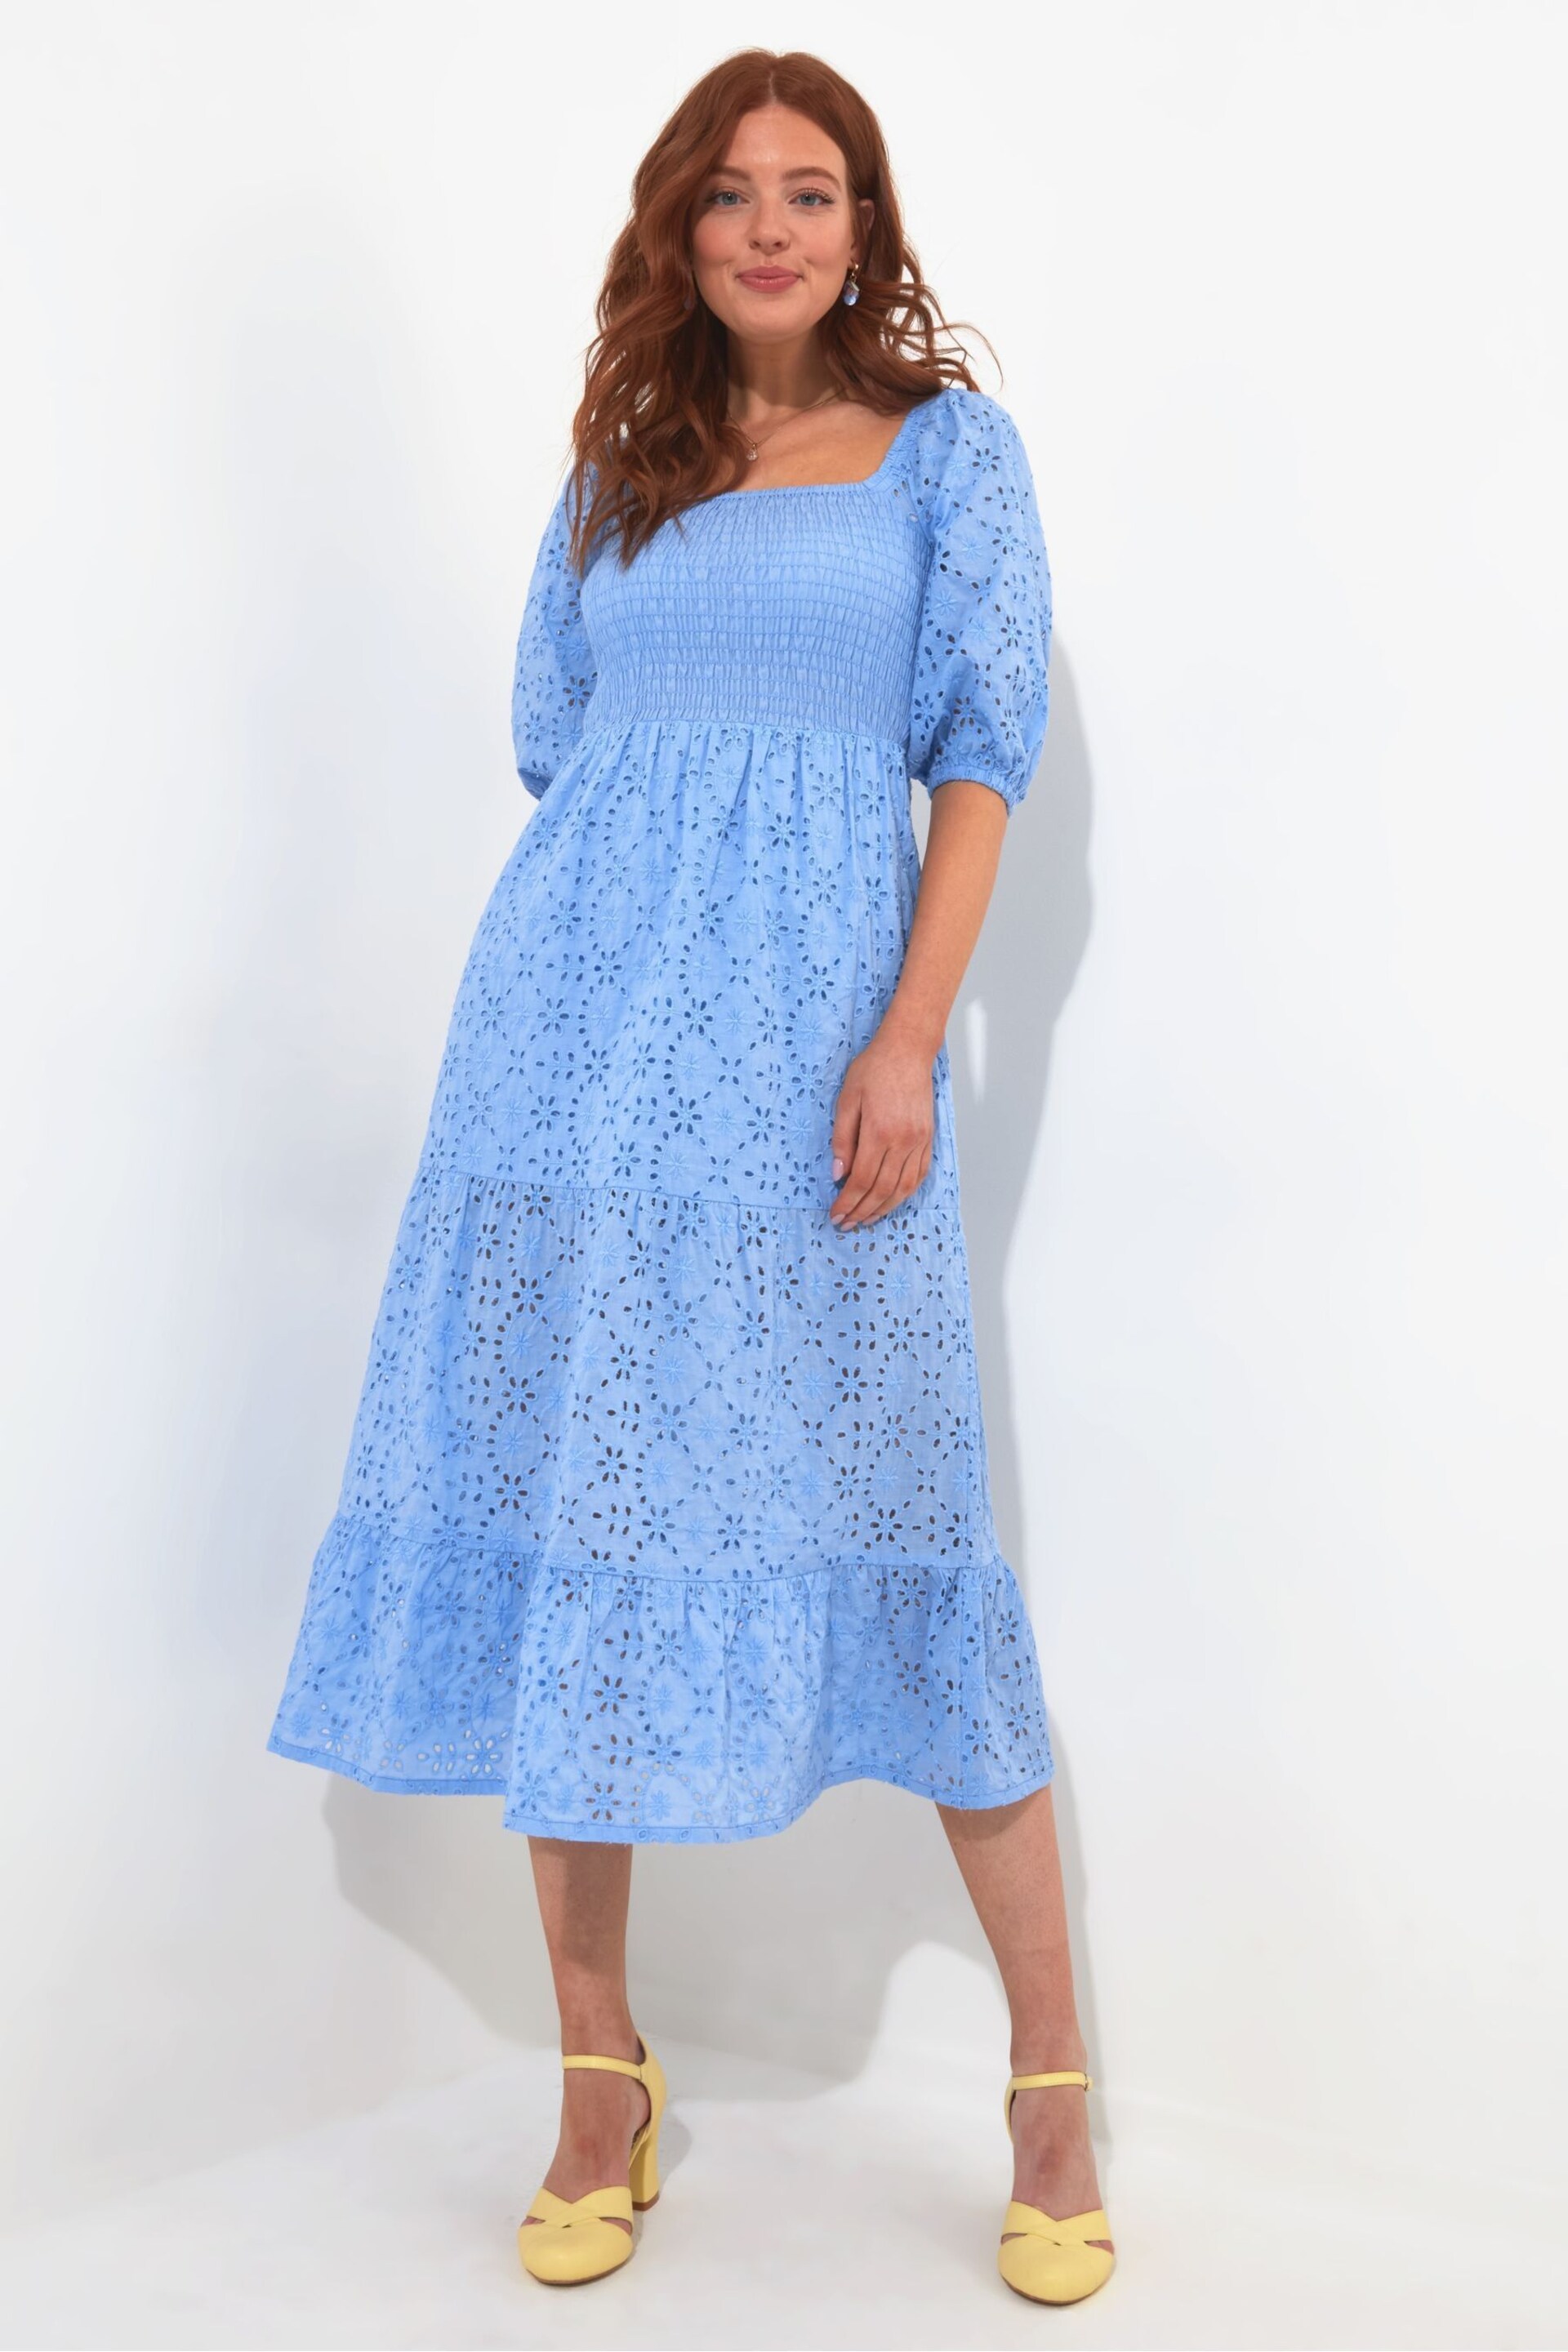 Joe Browns Blue Cotton Broderie Anglaise Puff Sleeve Tiered Midi Dress - Image 6 of 7